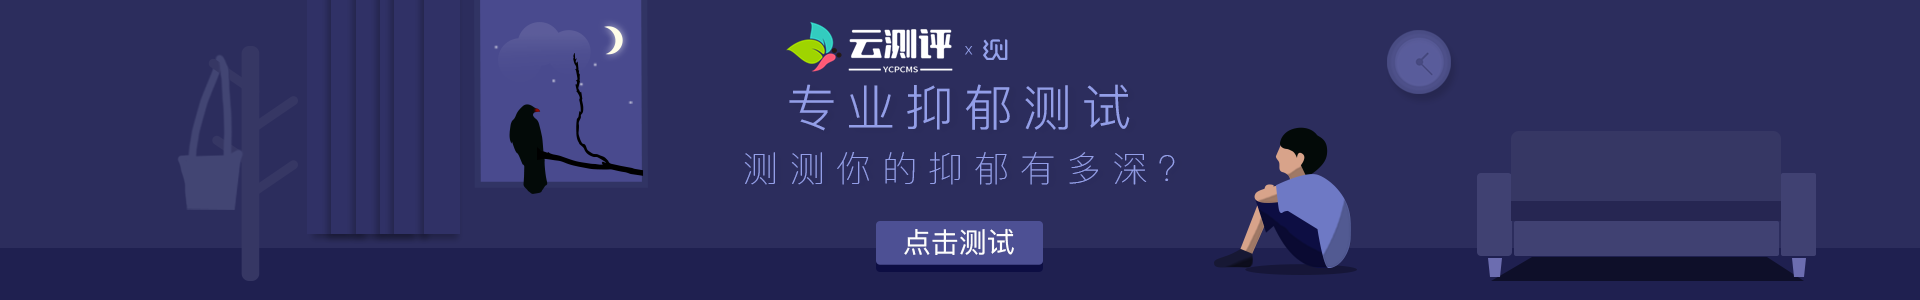 PC首页banner